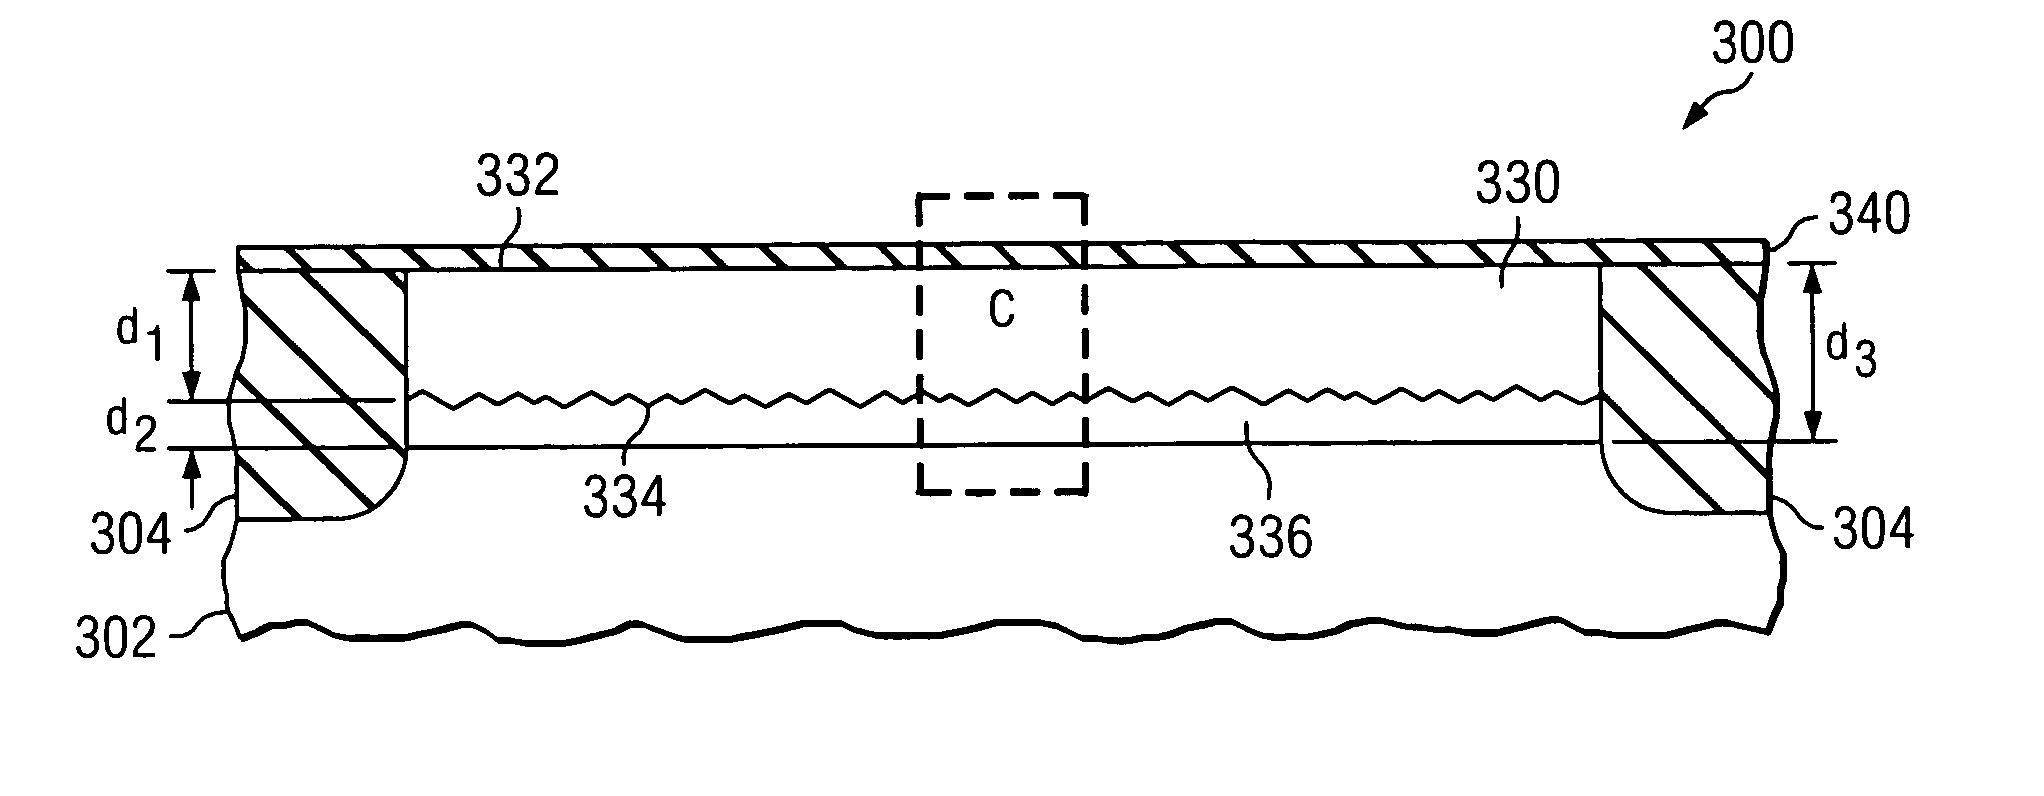 Transistor with shallow germanium implantation region in channel